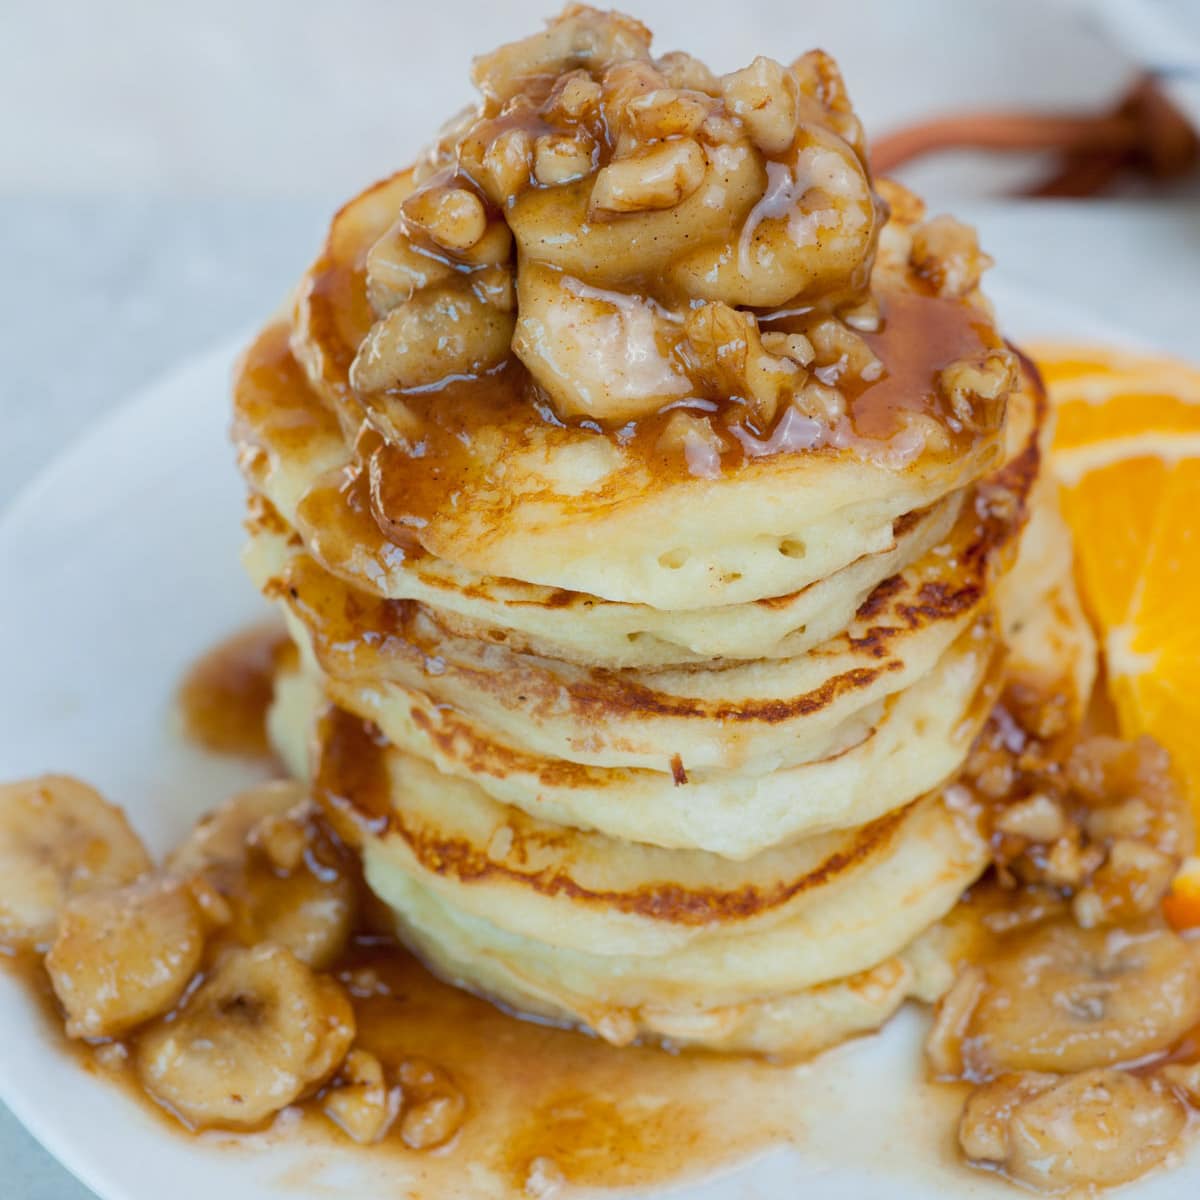 Bananas foster pancakes on a white plate.